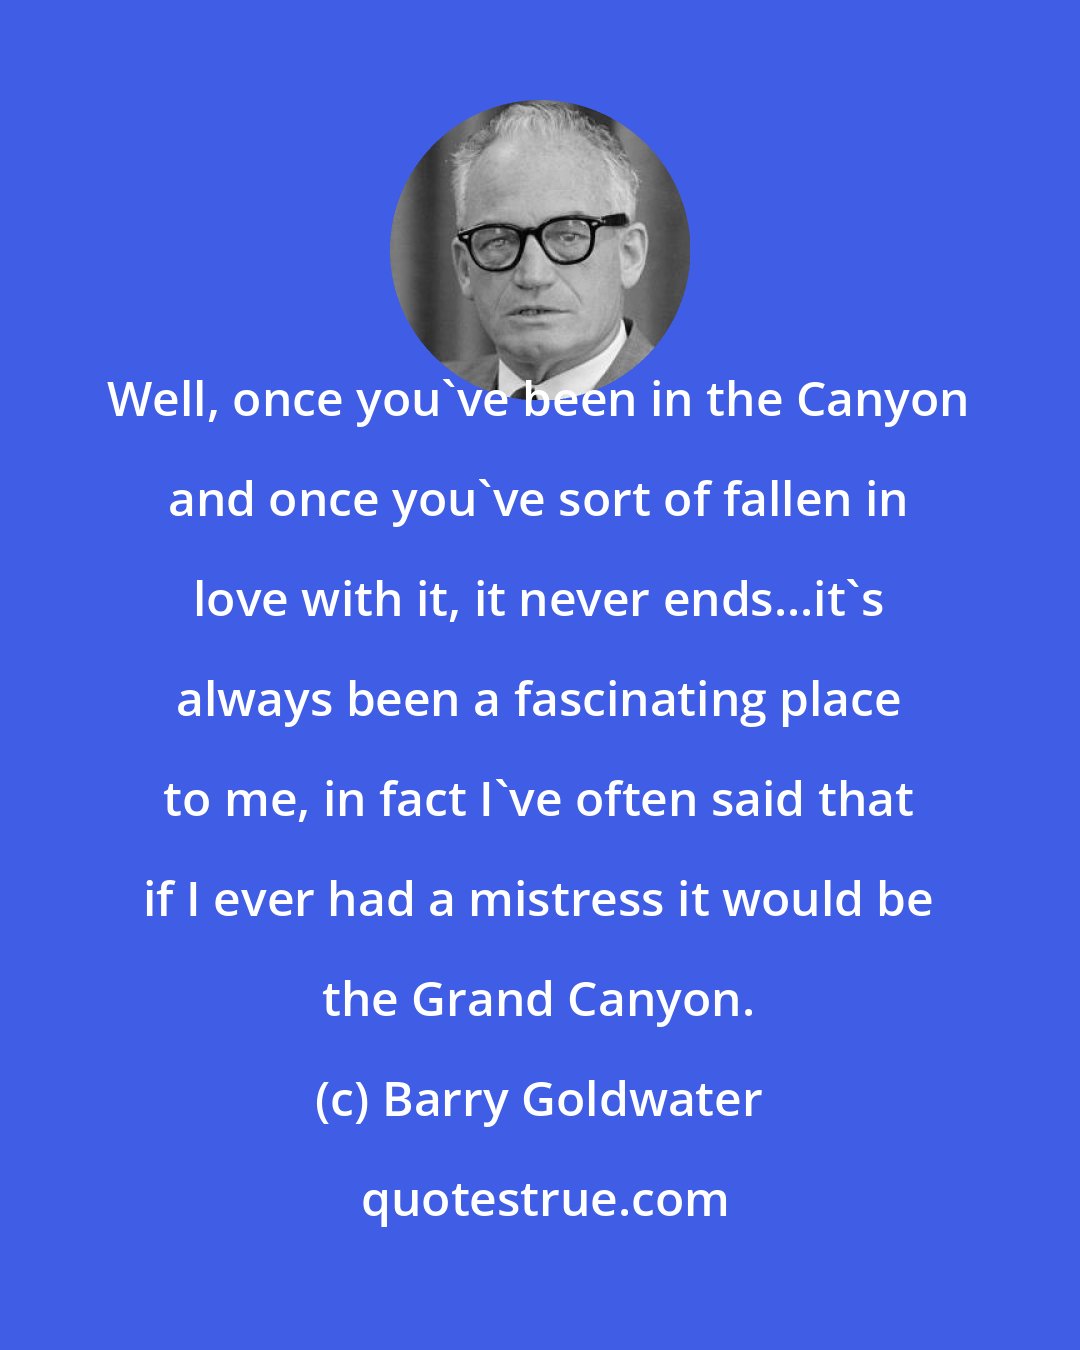 Barry Goldwater: Well, once you've been in the Canyon and once you've sort of fallen in love with it, it never ends...it's always been a fascinating place to me, in fact I've often said that if I ever had a mistress it would be the Grand Canyon.